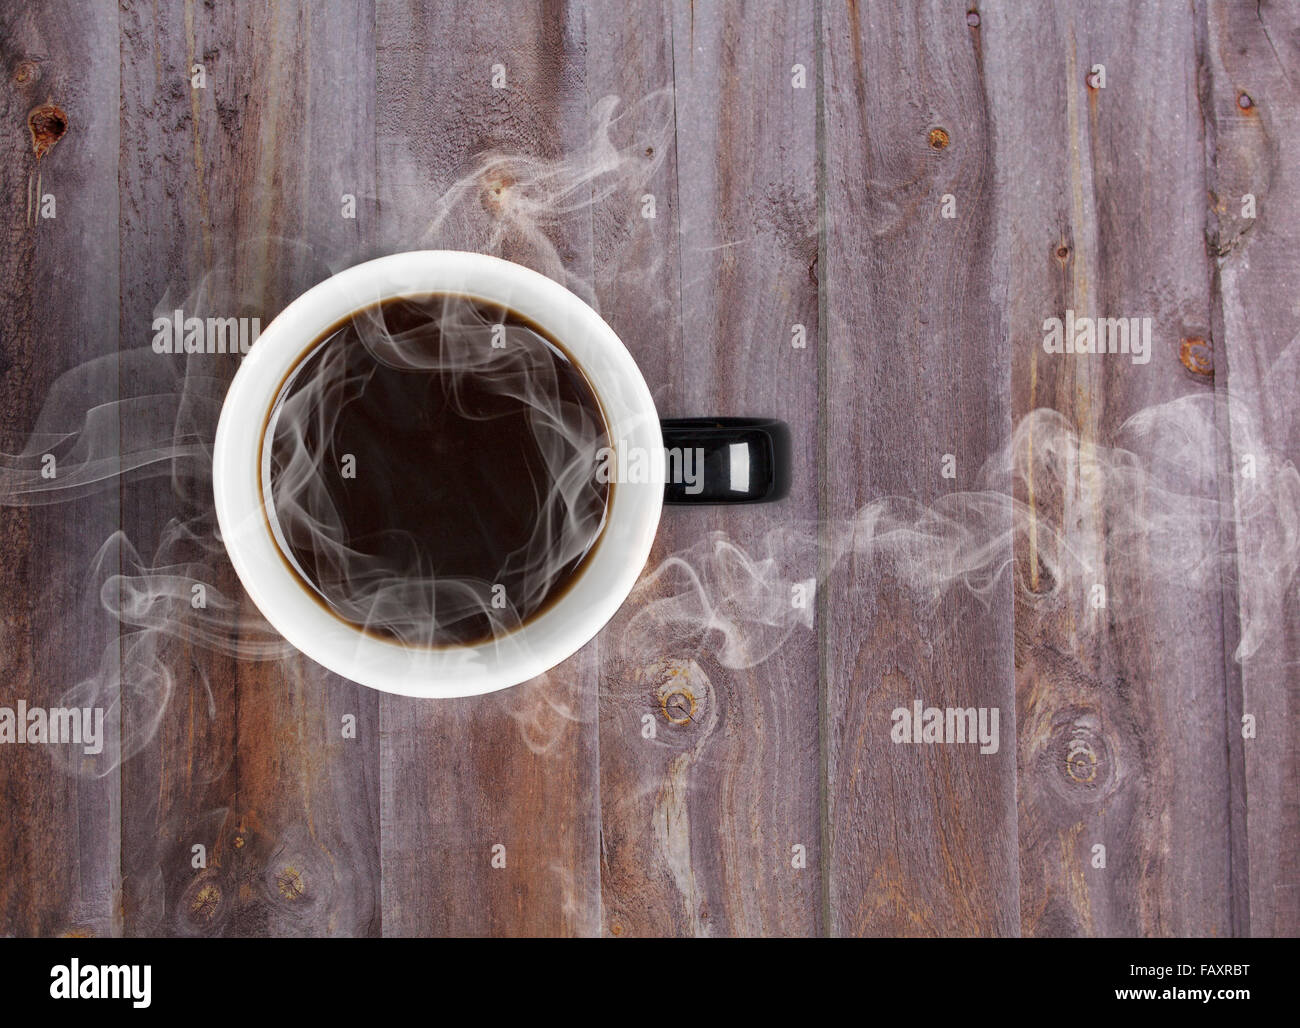 Coffee mug placed on wooden table with steaming hot black coffee Stock Photo